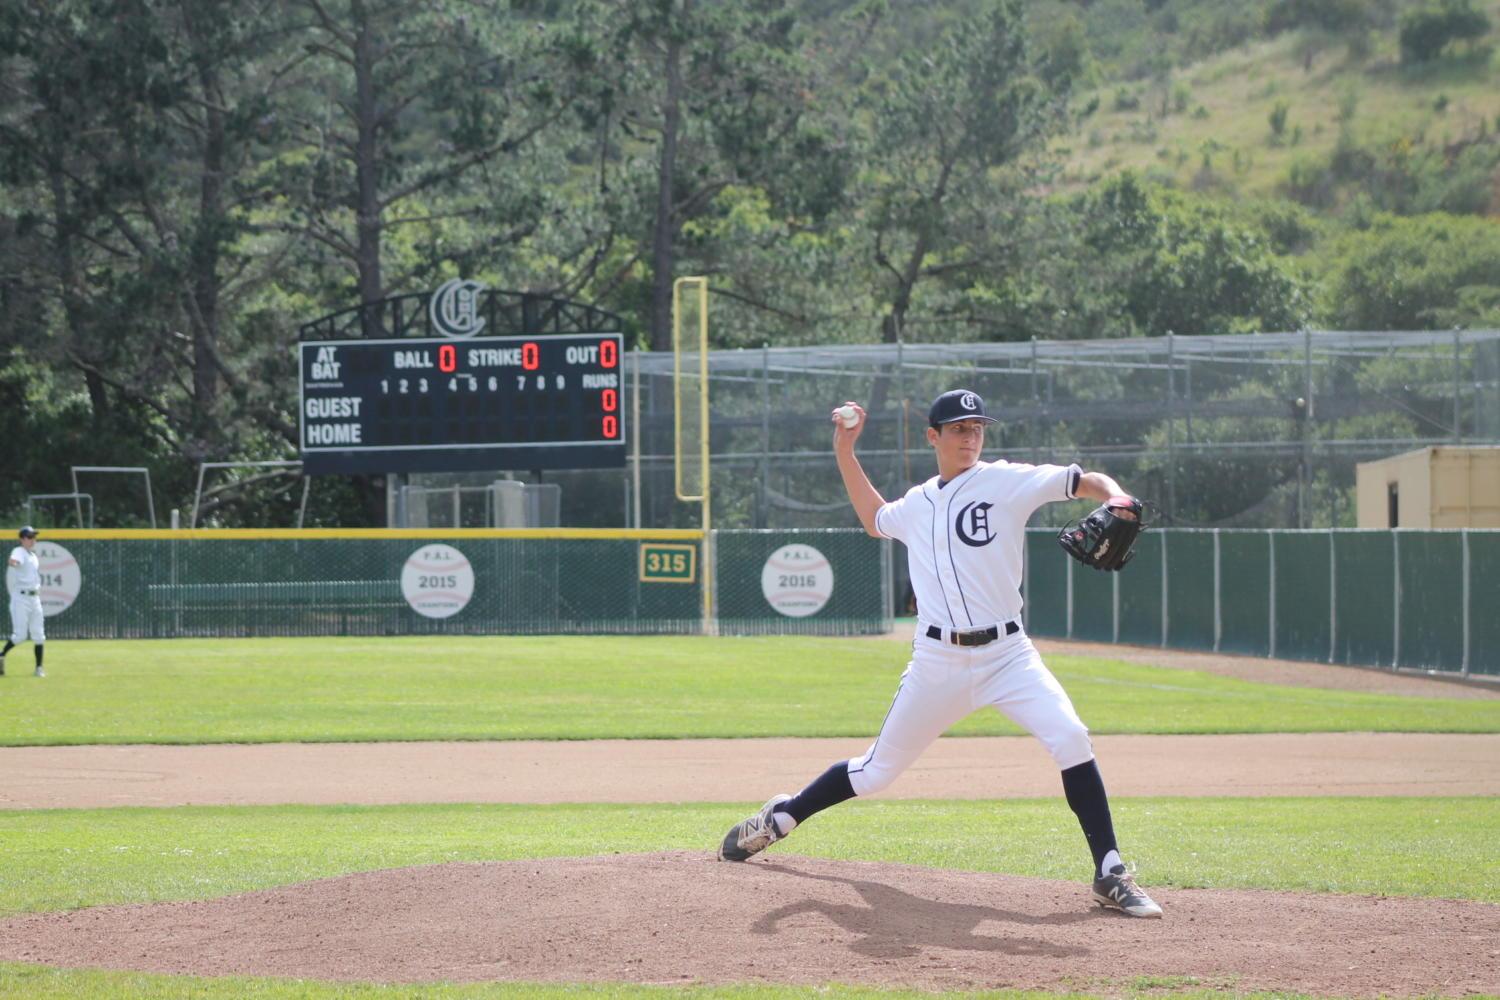 Sophomore David Bedrosian warms up on the mount before the game against Burlingame. Carlmont beat Burlingame 8-3 on April 26. Bedrosian would pitch for 5 innings and contribute to many of Carlmont's points with his hits. 